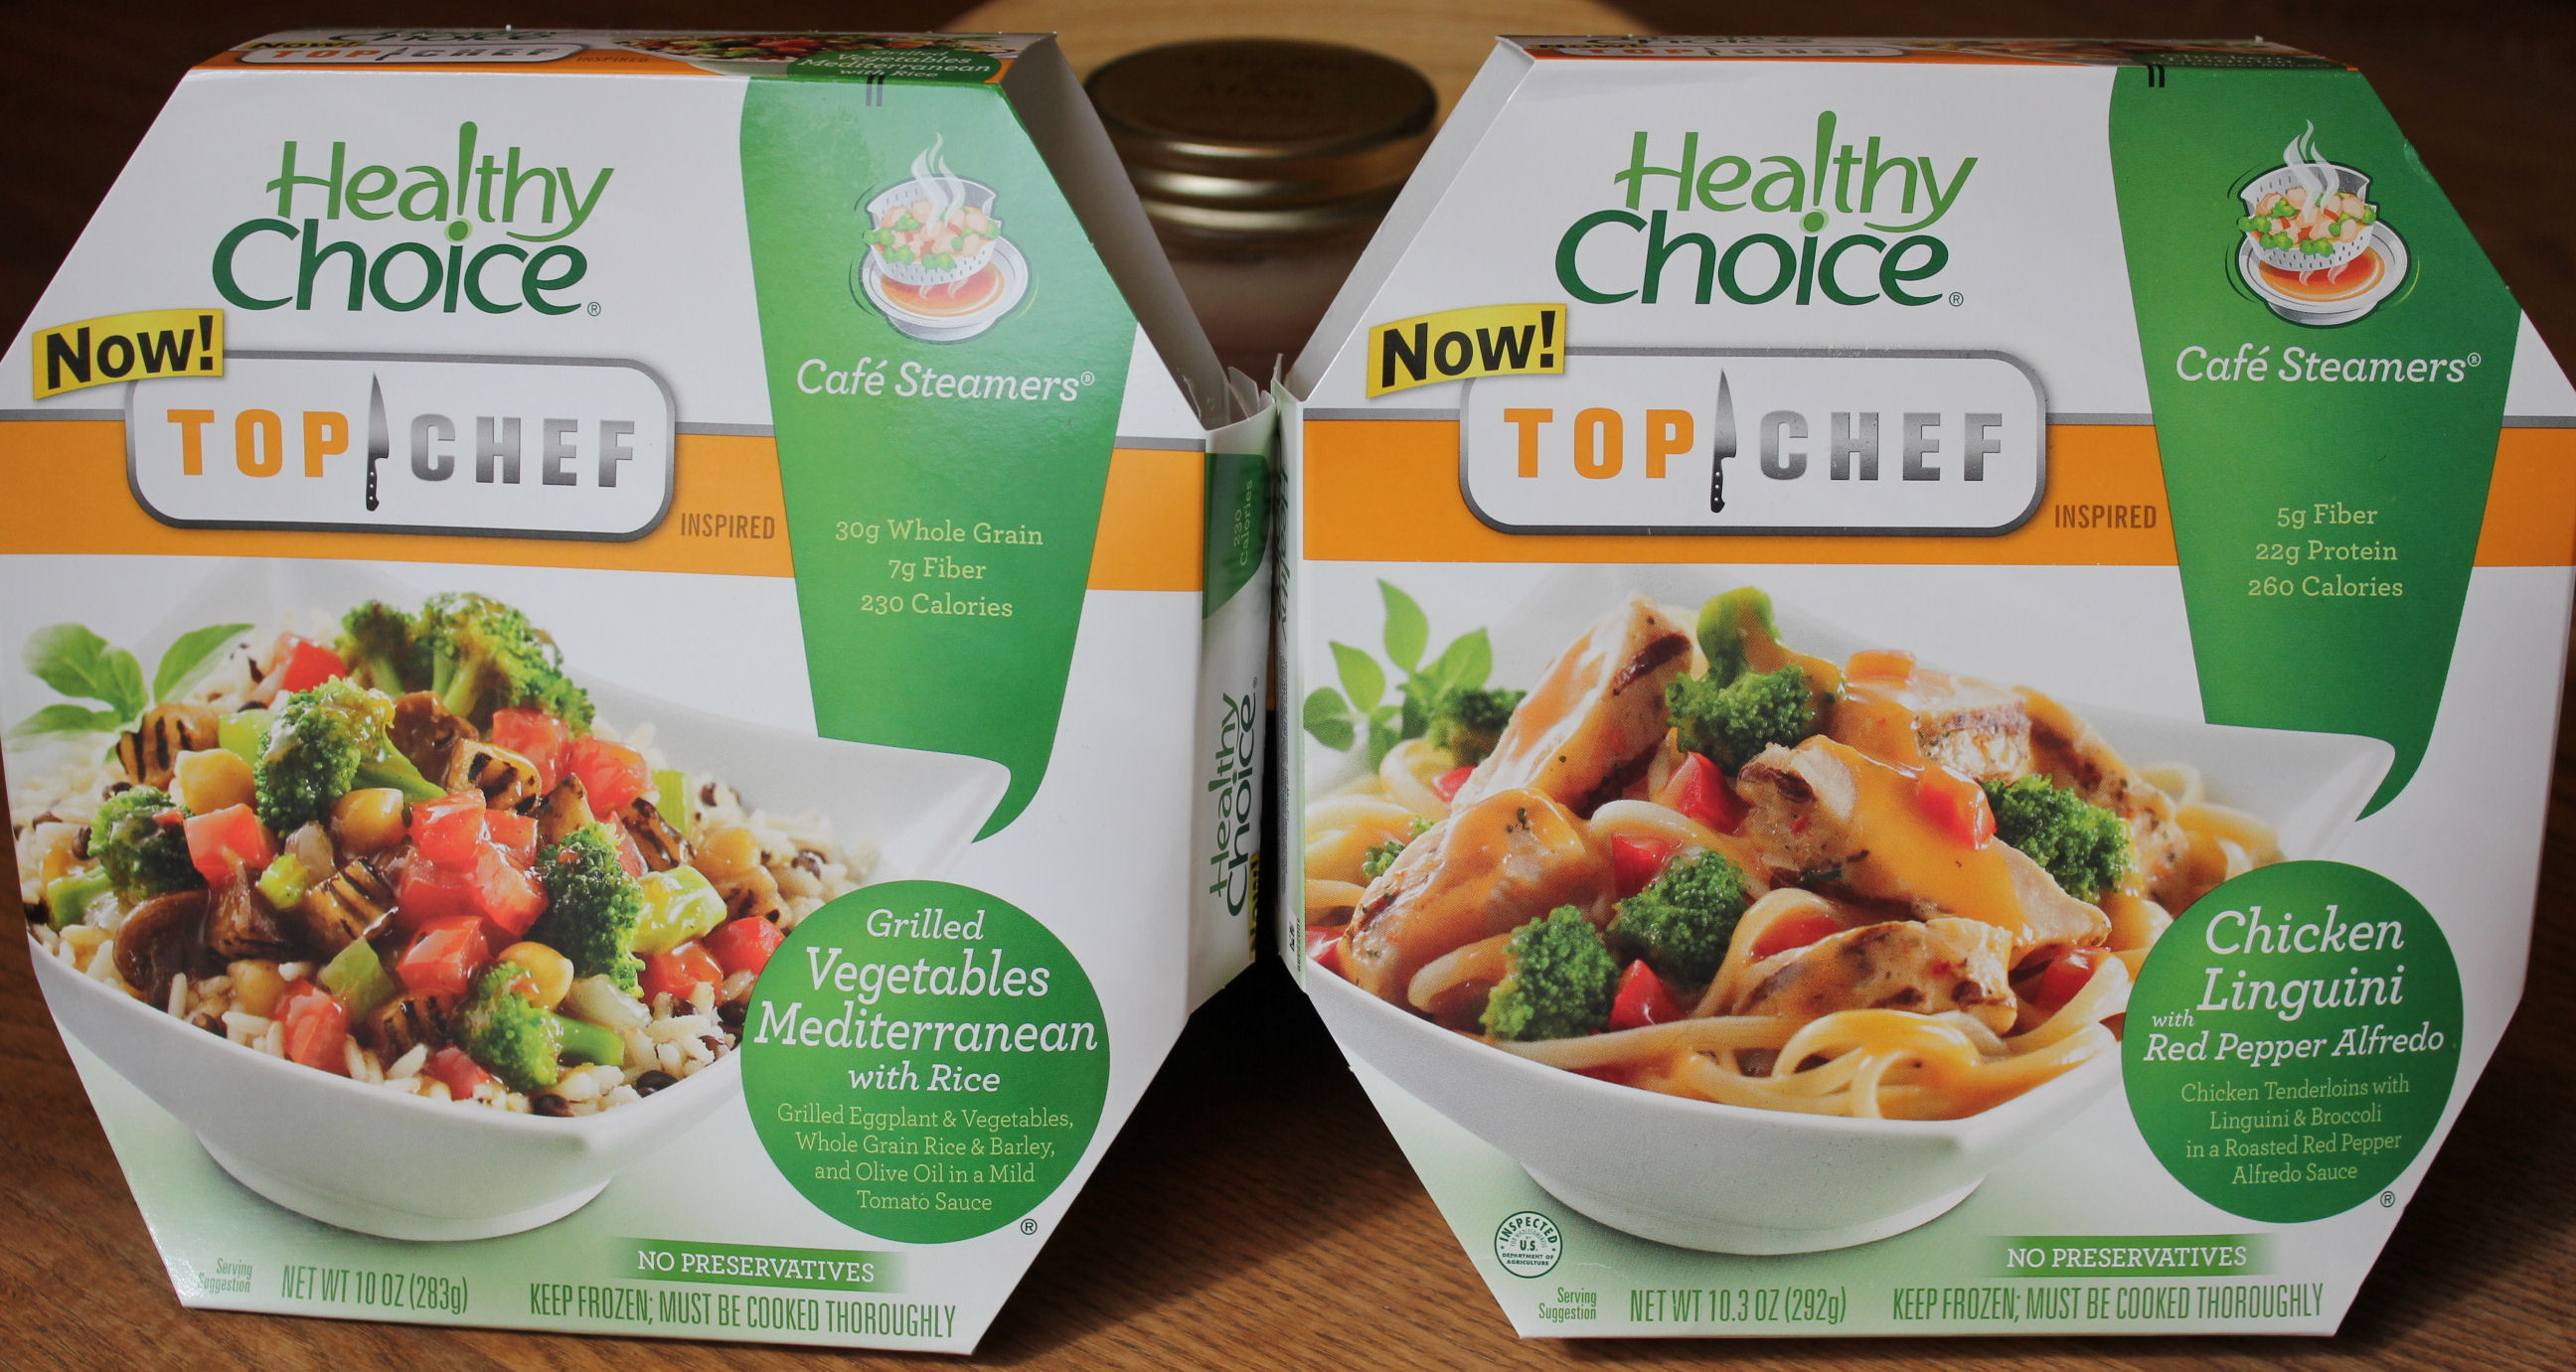 Healthy Choice Tv Dinners
 Healthy Choice Entrees Inspired by Top Chef